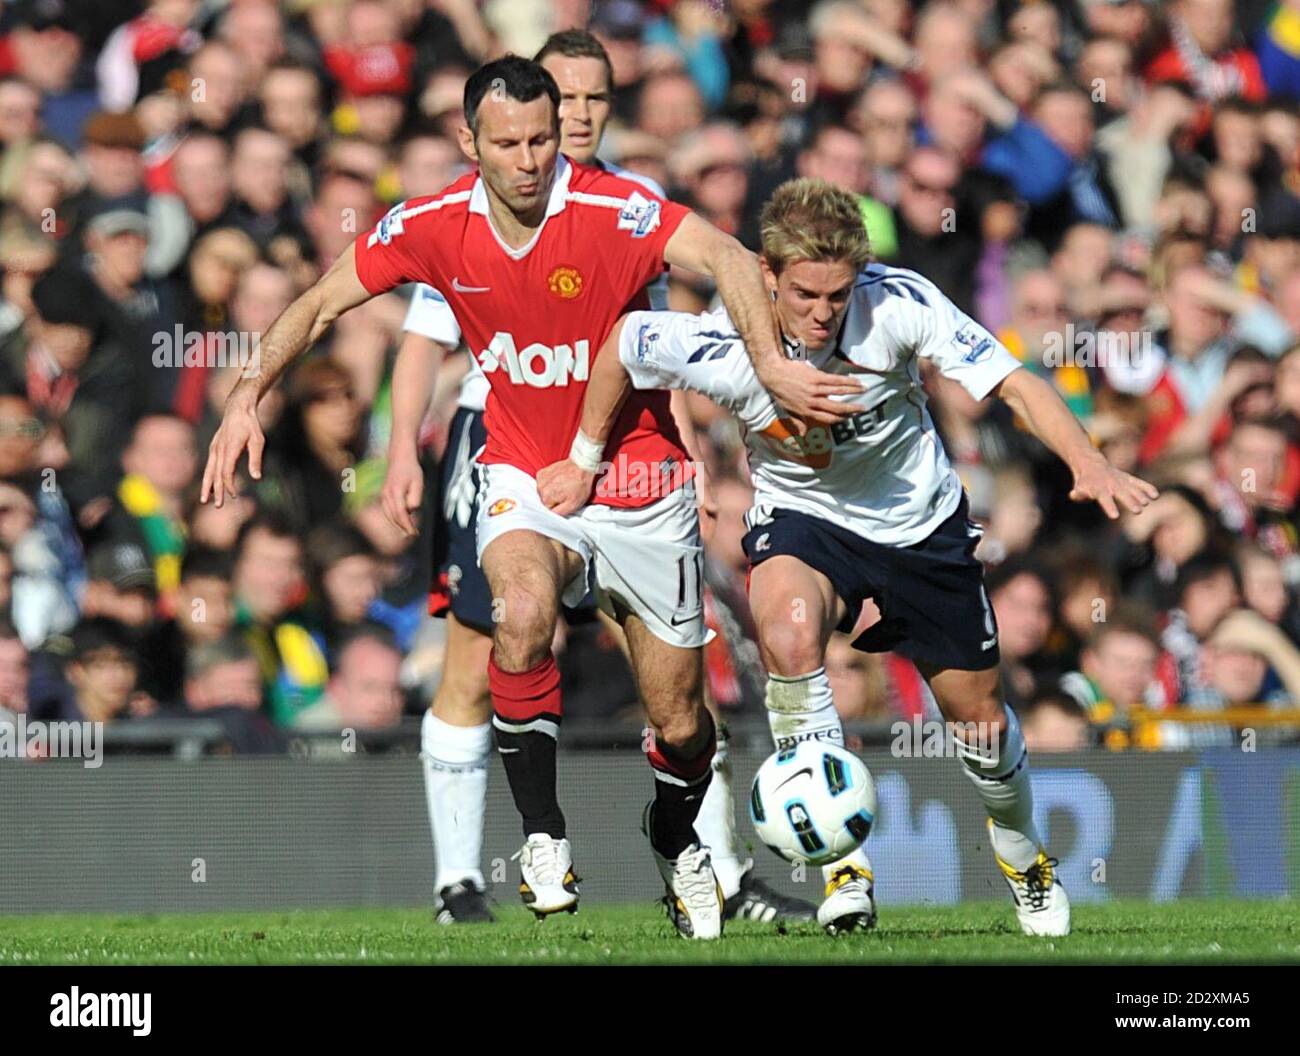 Manchester United's Ryan Giggs (left) and Bolton Wanderers' Stuart Holden (right) battle for the ball Stock Photo